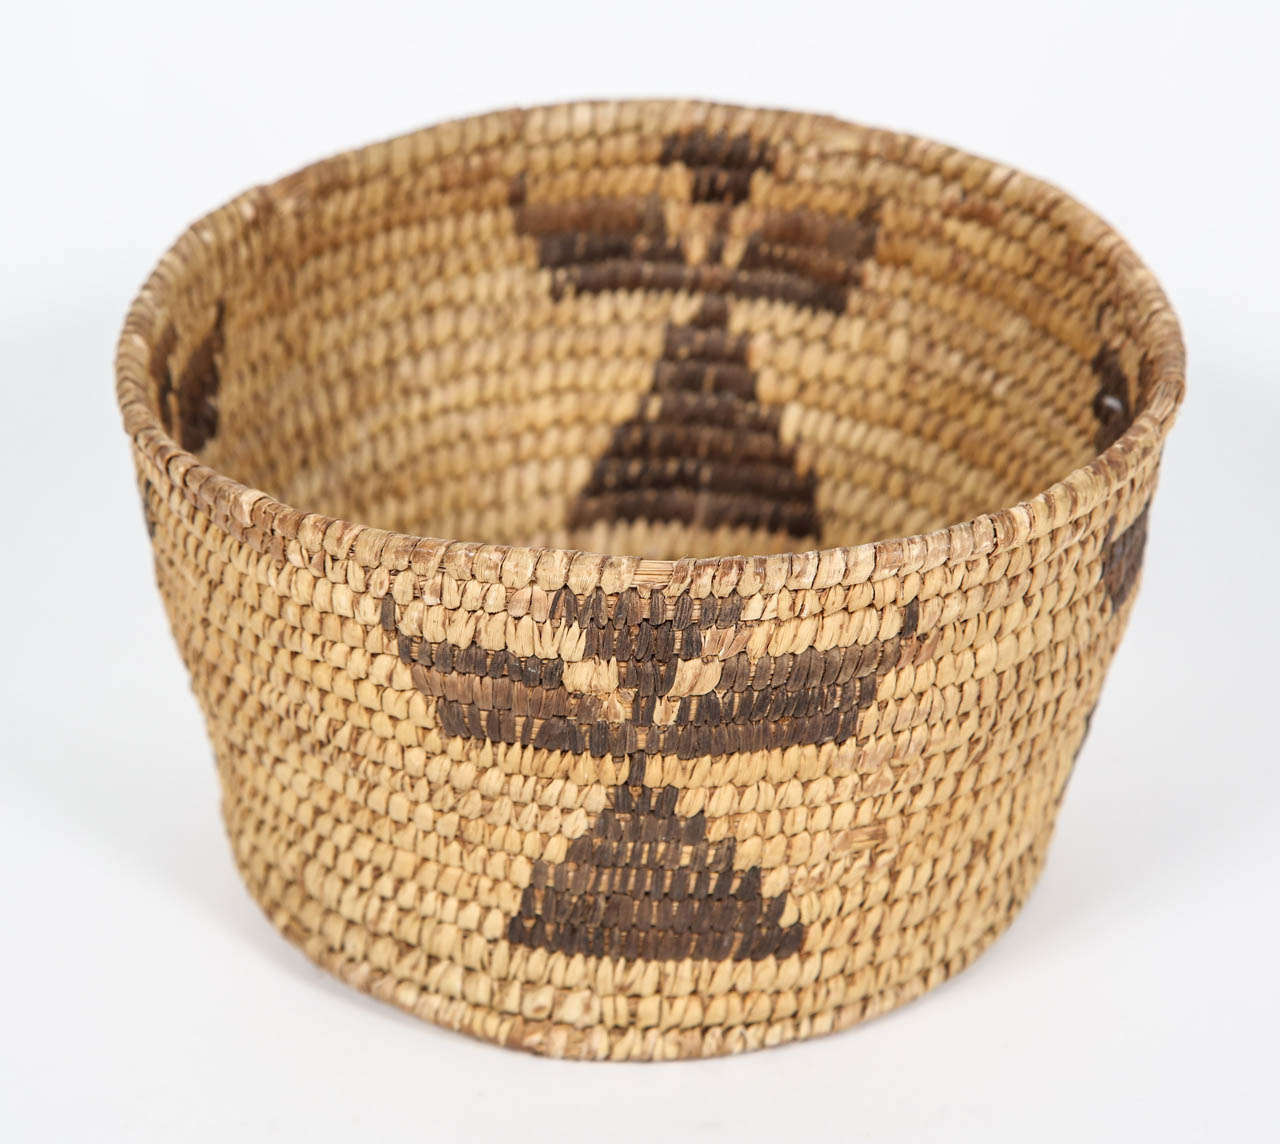 Small vintage woven basket with tribal pattern made by the Papago. 

The Papago, now known as the Tohono O'odham, are a Native American group who primarily resided in the Sonoran Desert of southeastern Arizona and northwestern Mexico. Today there